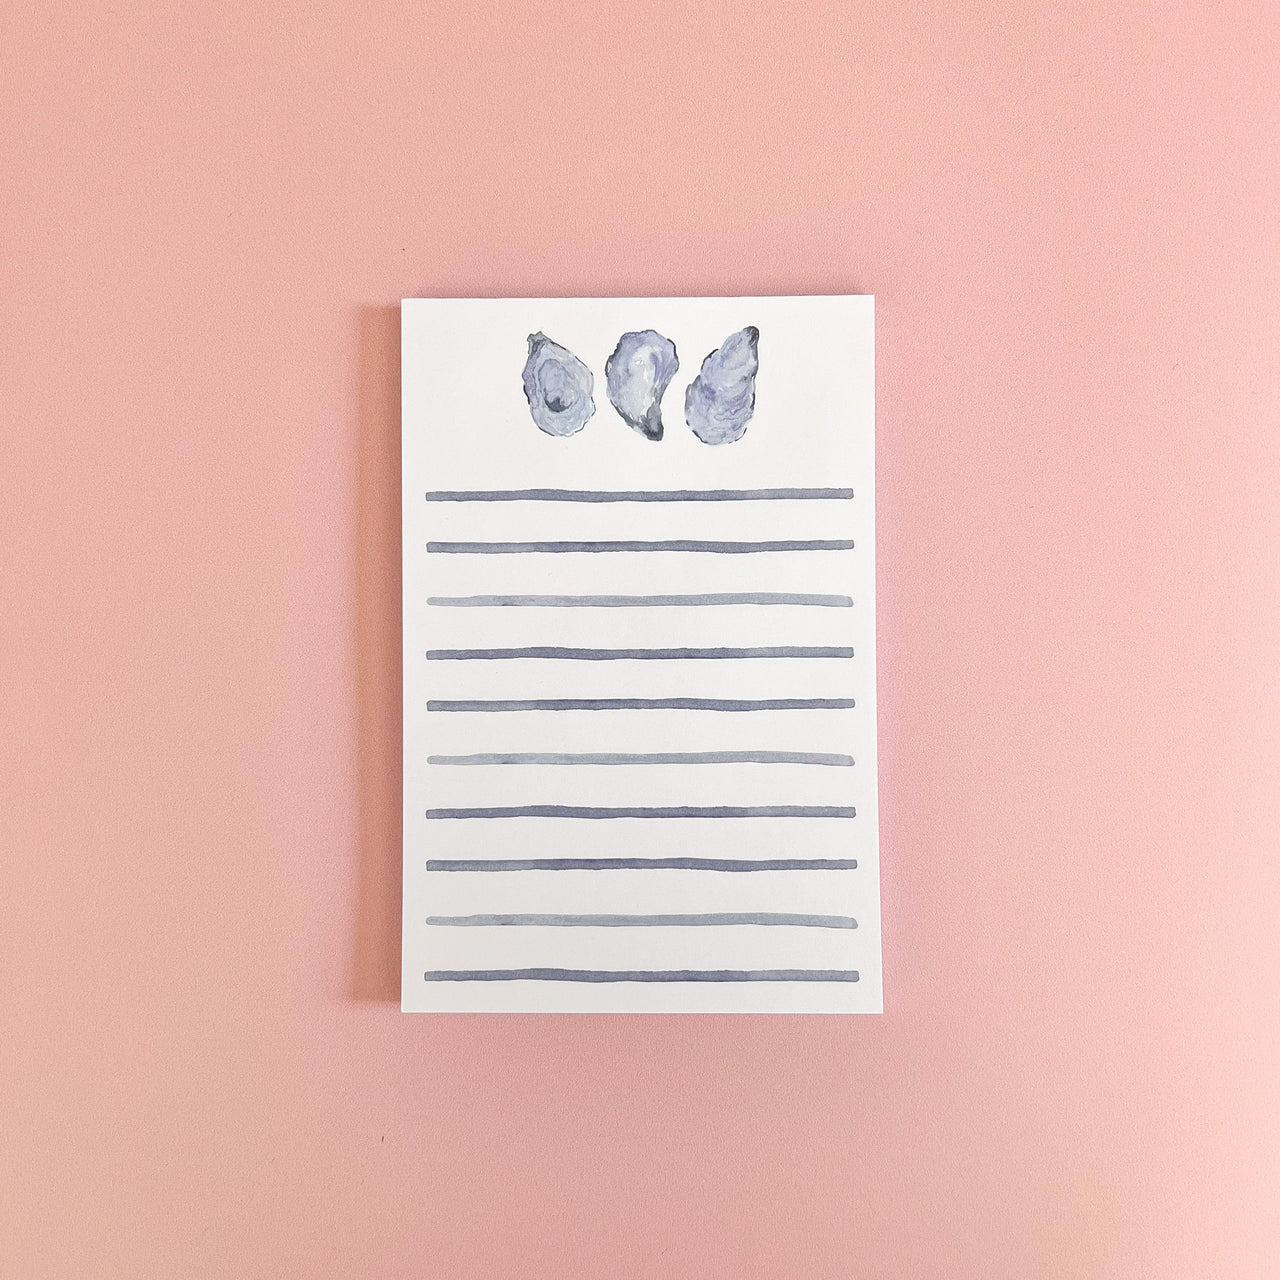 Watercolor Mussels Notepad by Gert & Co